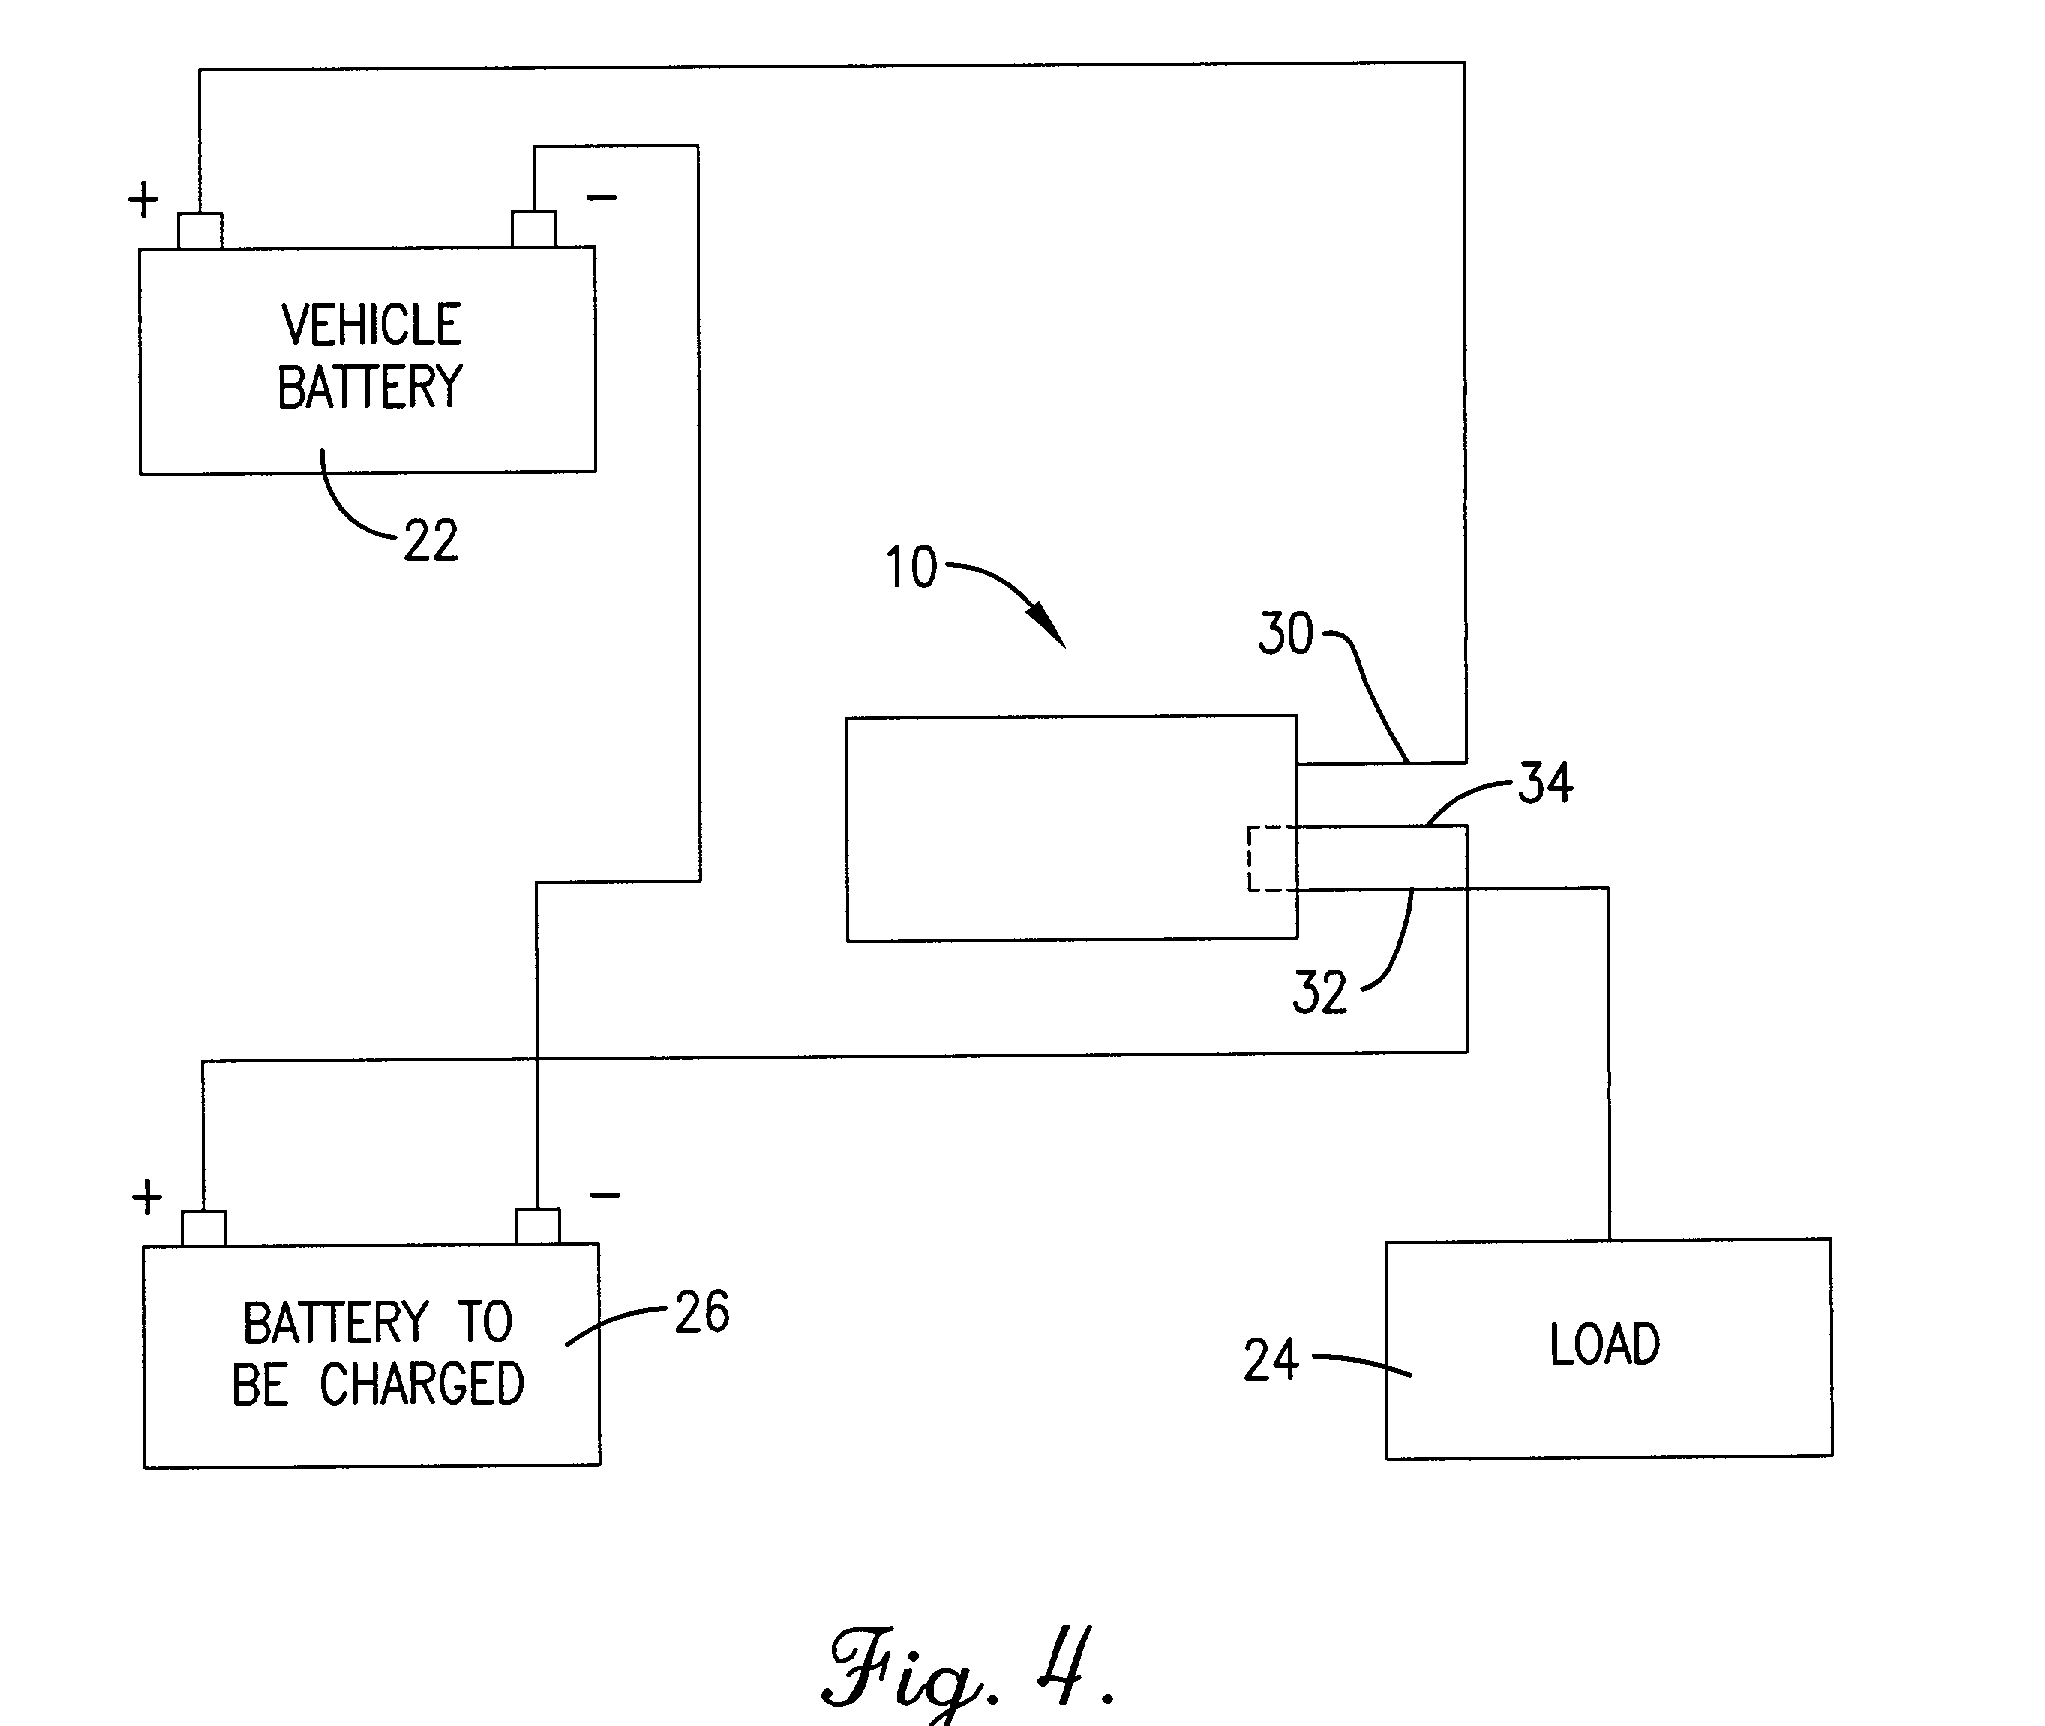 Battery charger protection circuit